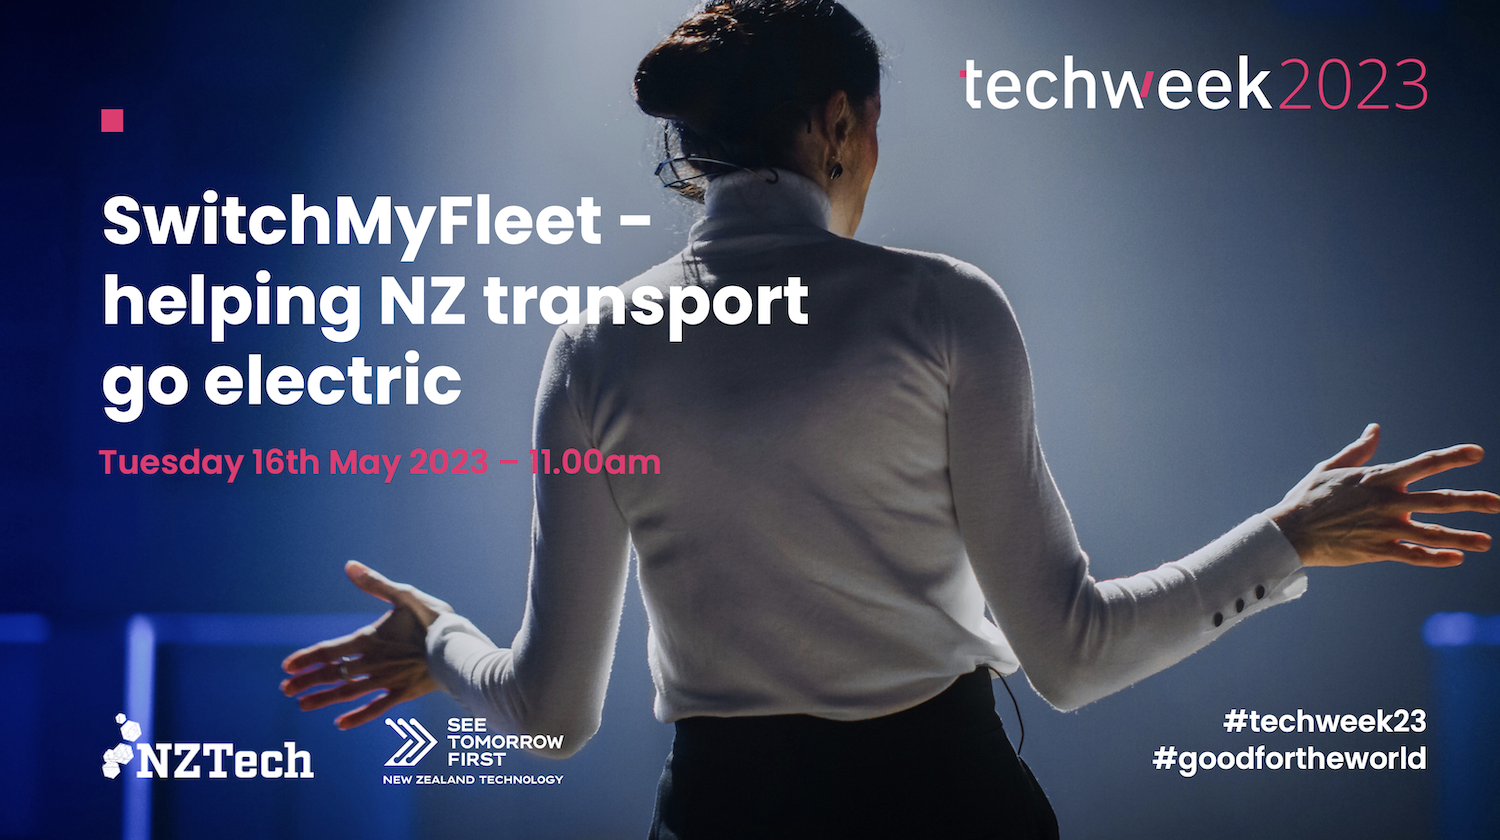 Techweek 2023 is nearly here – make sure you register for our SwitchMyFleet Techweek webinar event!